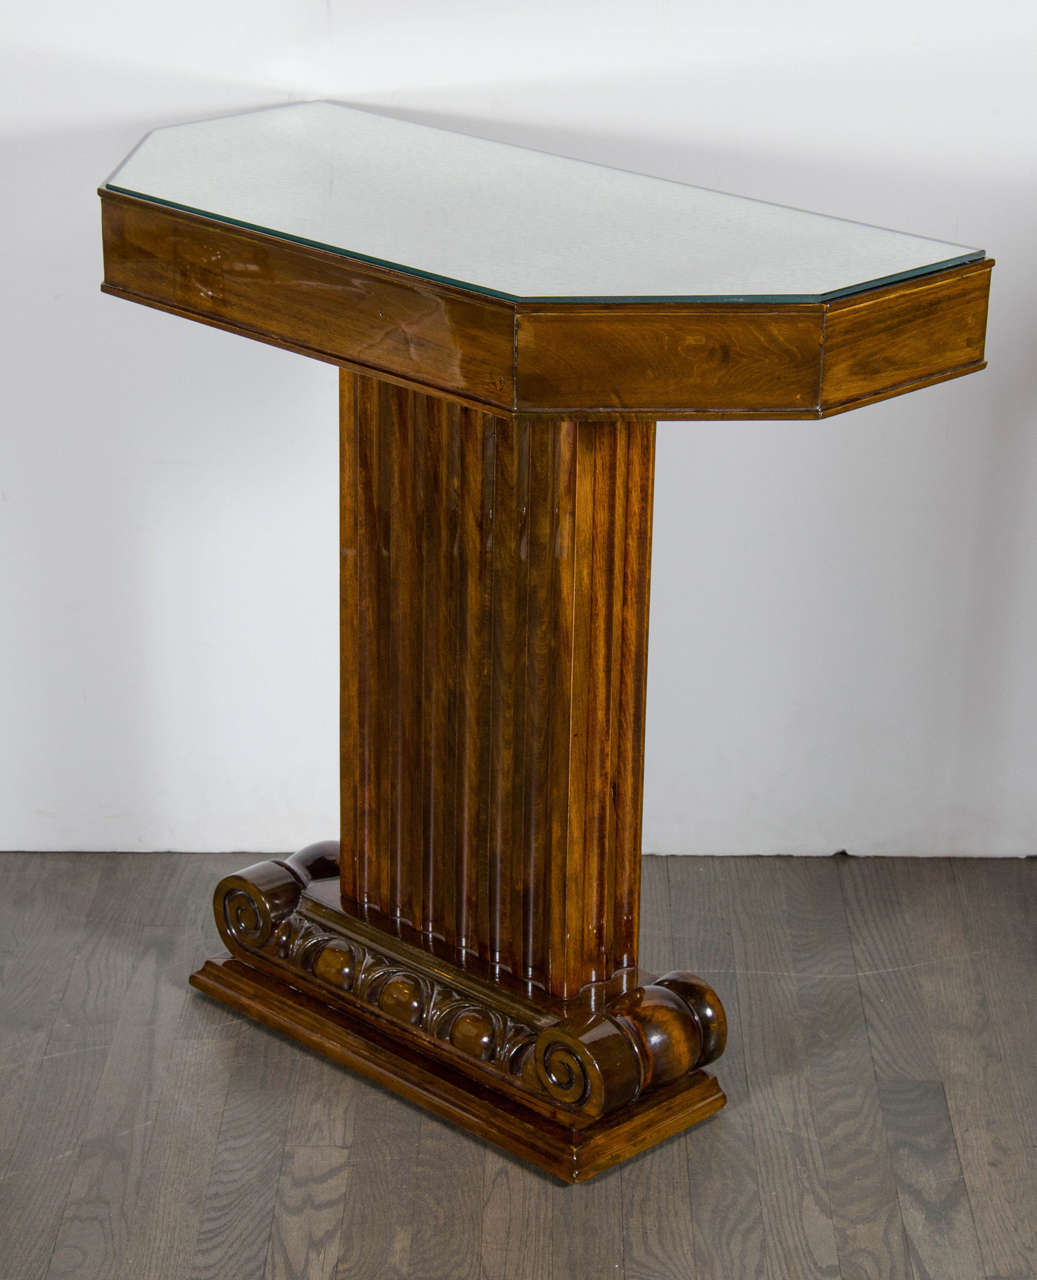 This 1940s Hollywood console was designed by the esteemed American designer Lorin Jackson for Grosfeld House, circa 1945. The console features a column style pedestal base with stylized ionic column and fluted detailed support all in beautiful